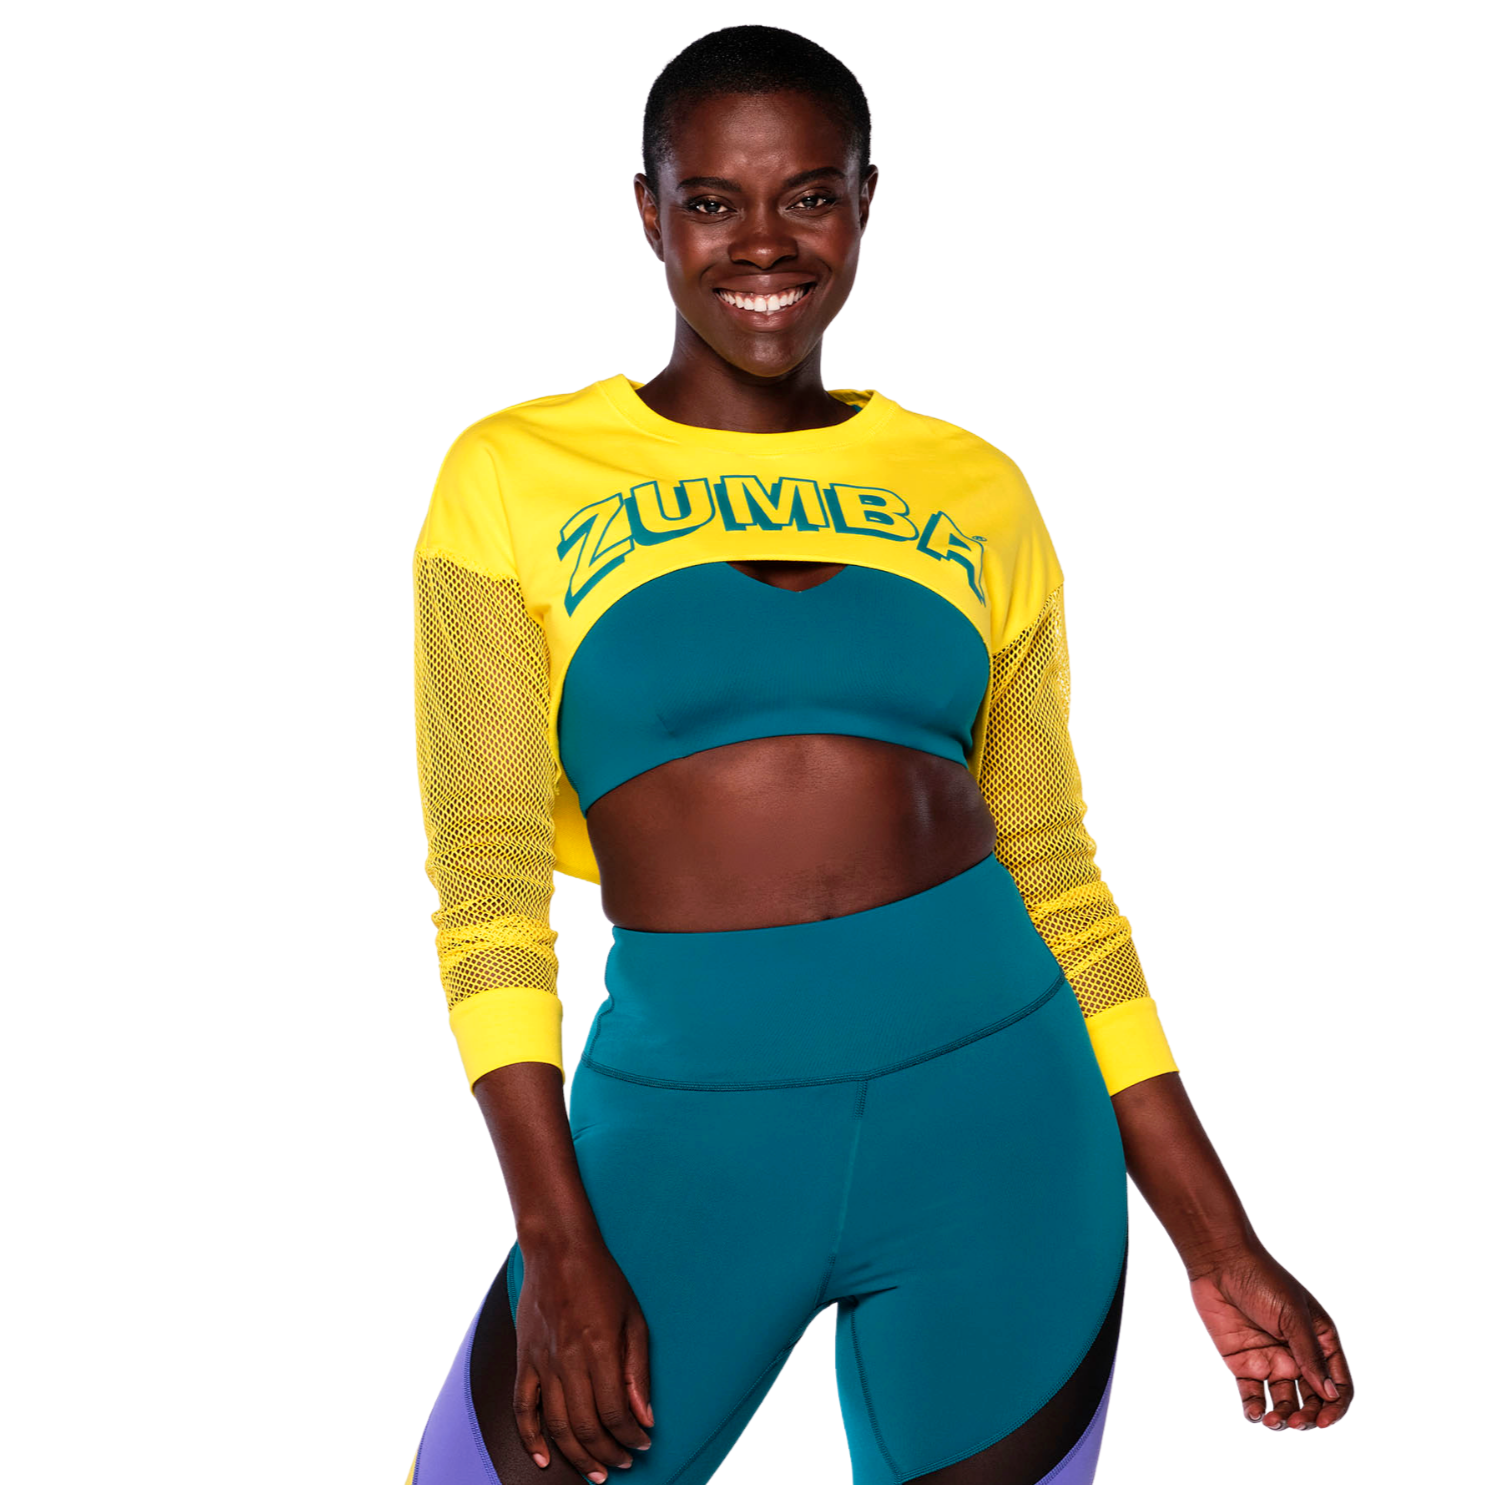 Zumba In Motion Long Sleeve Crop Top (Special Order)